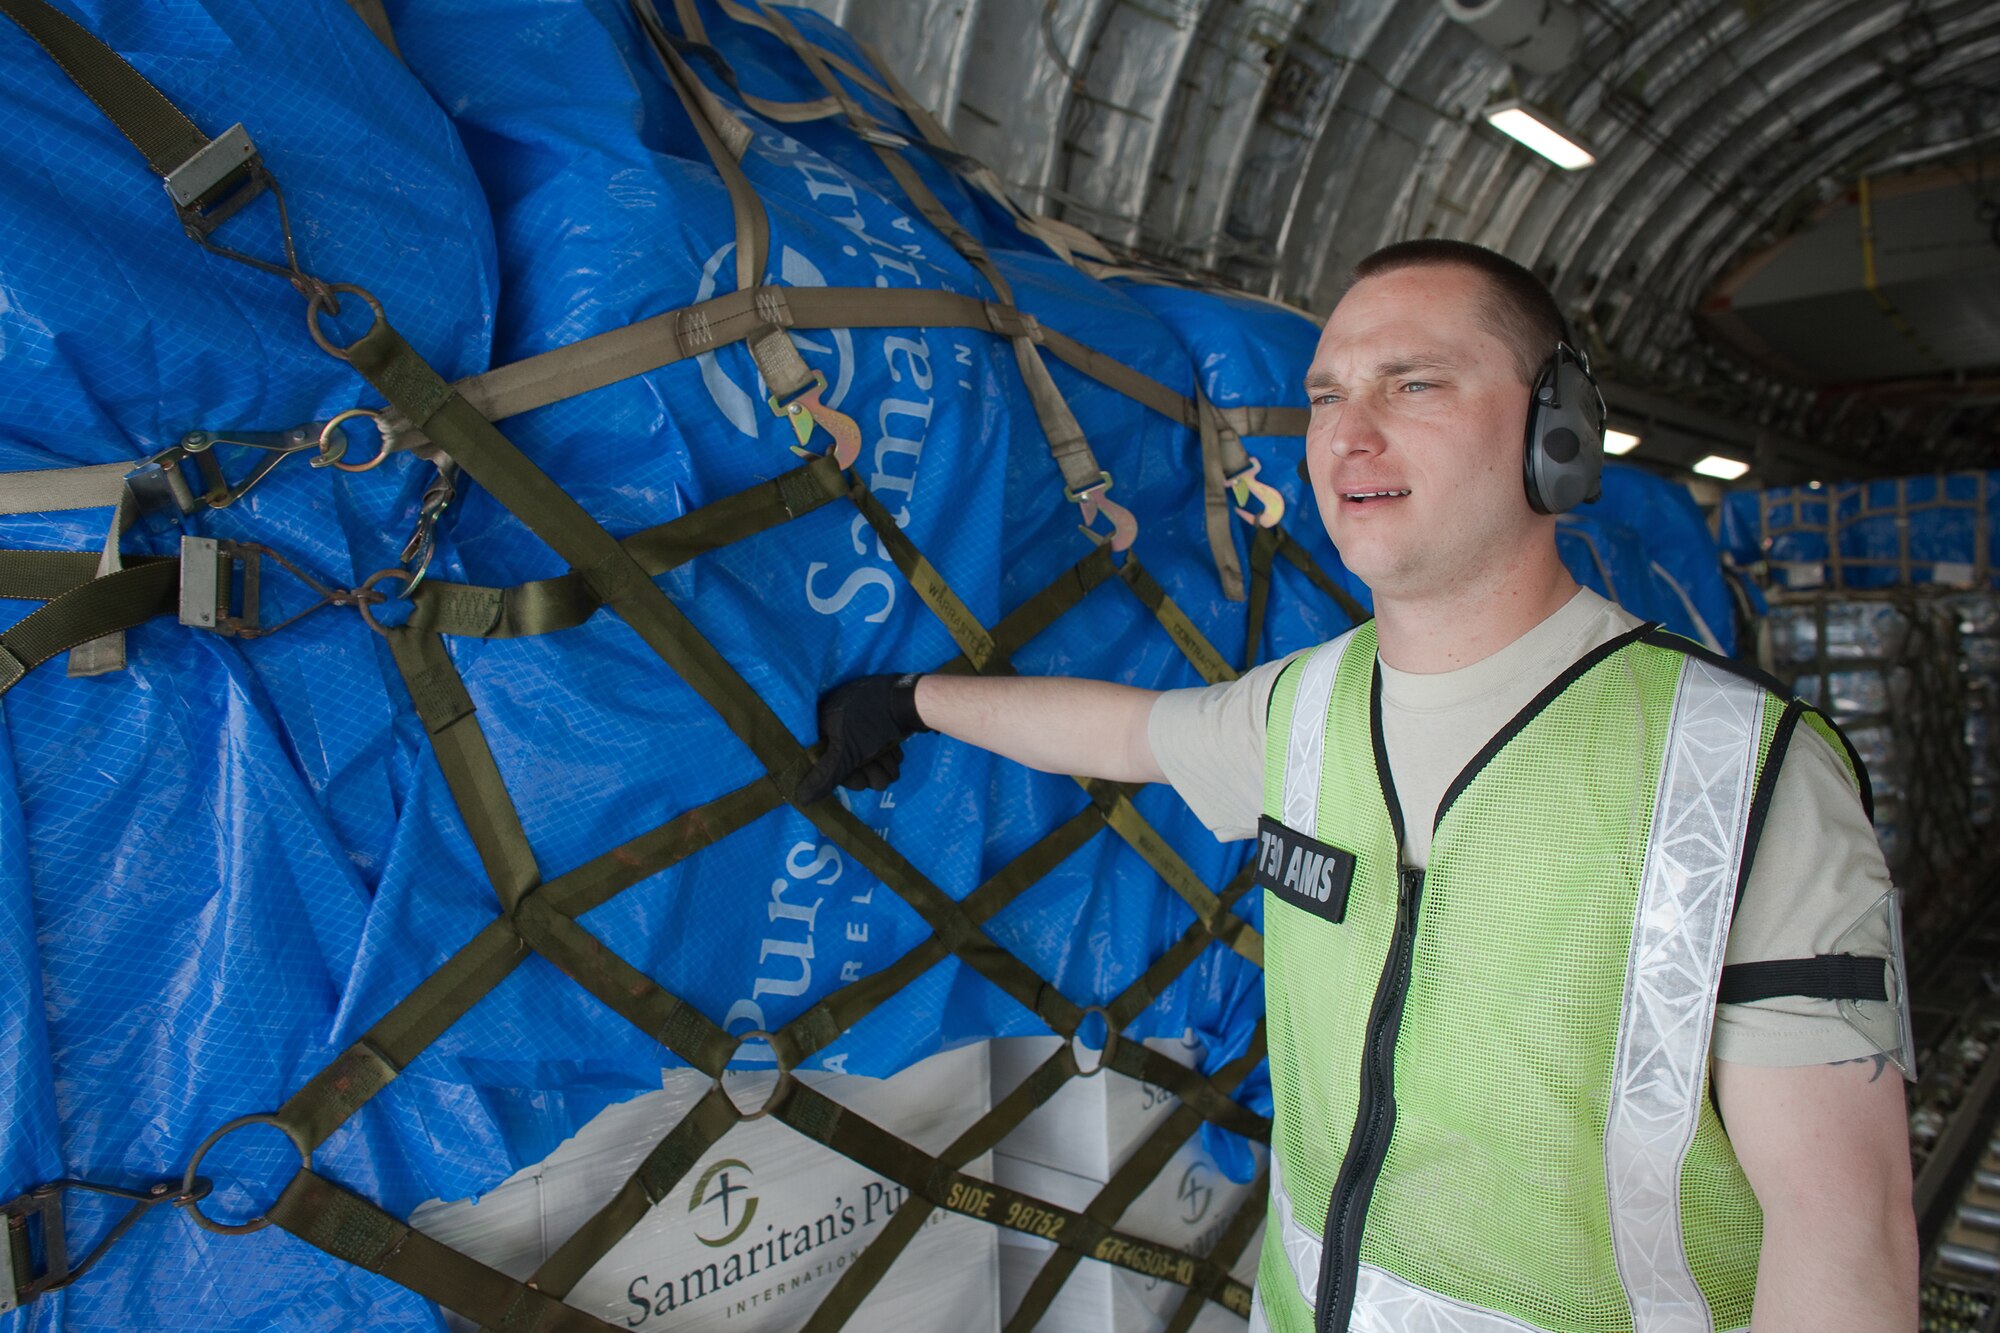 YOKOTA AIR BASE, Japan -- Staff Sgt. Jason Doyle, 730th Air Mobility Squadron, finishes loading ten pallets of humanitarian relief supplies onto a C-17 Globemaster III here March 20. This was the first C-17 carrying humanitarian relief supplies to land at Sendai Airport. (U.S. Air Force photo/Osakabe Yasuo)(Released)